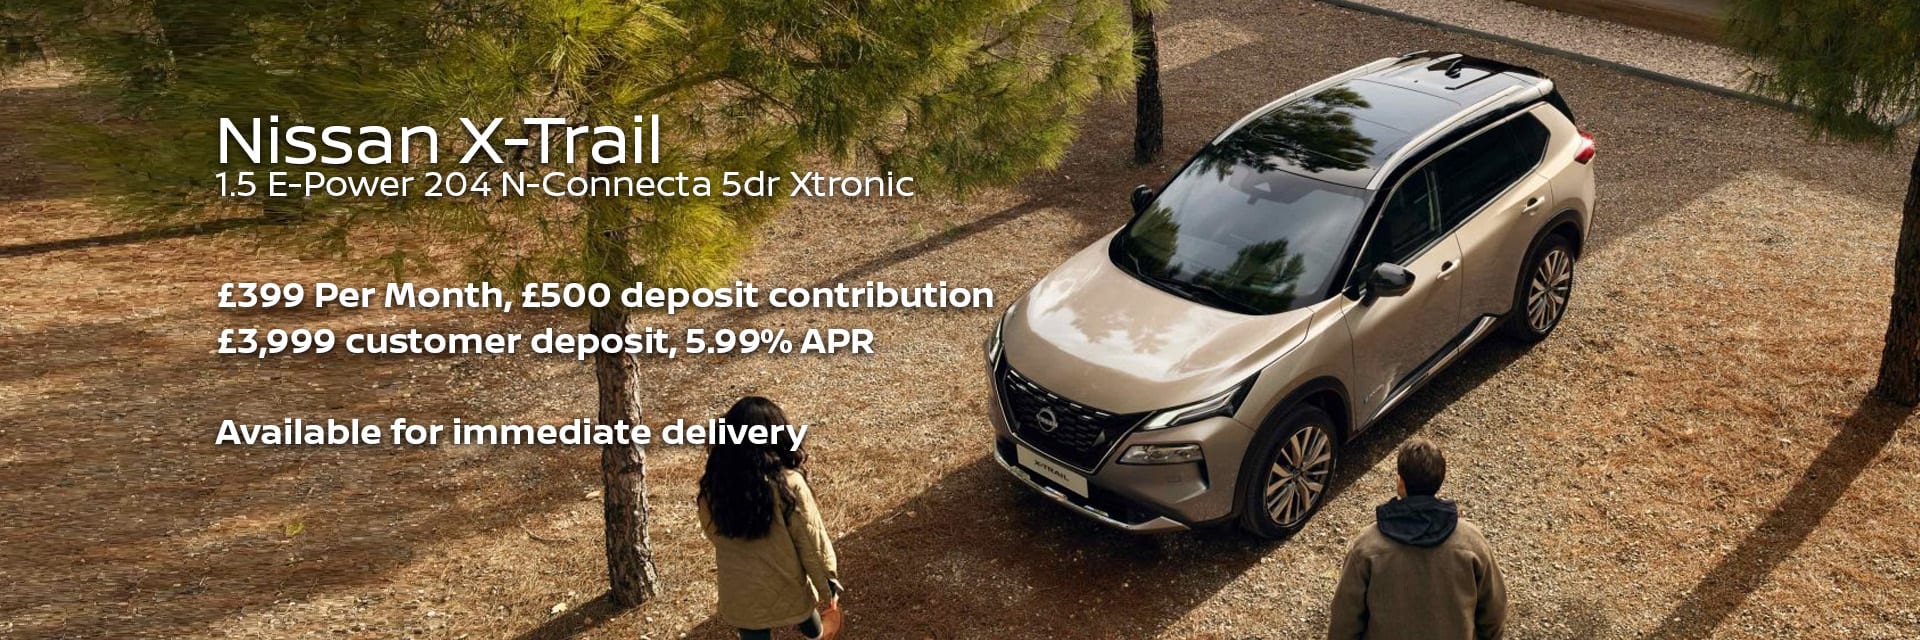 Nissan X-Trail N-Connecta with E-Power offer